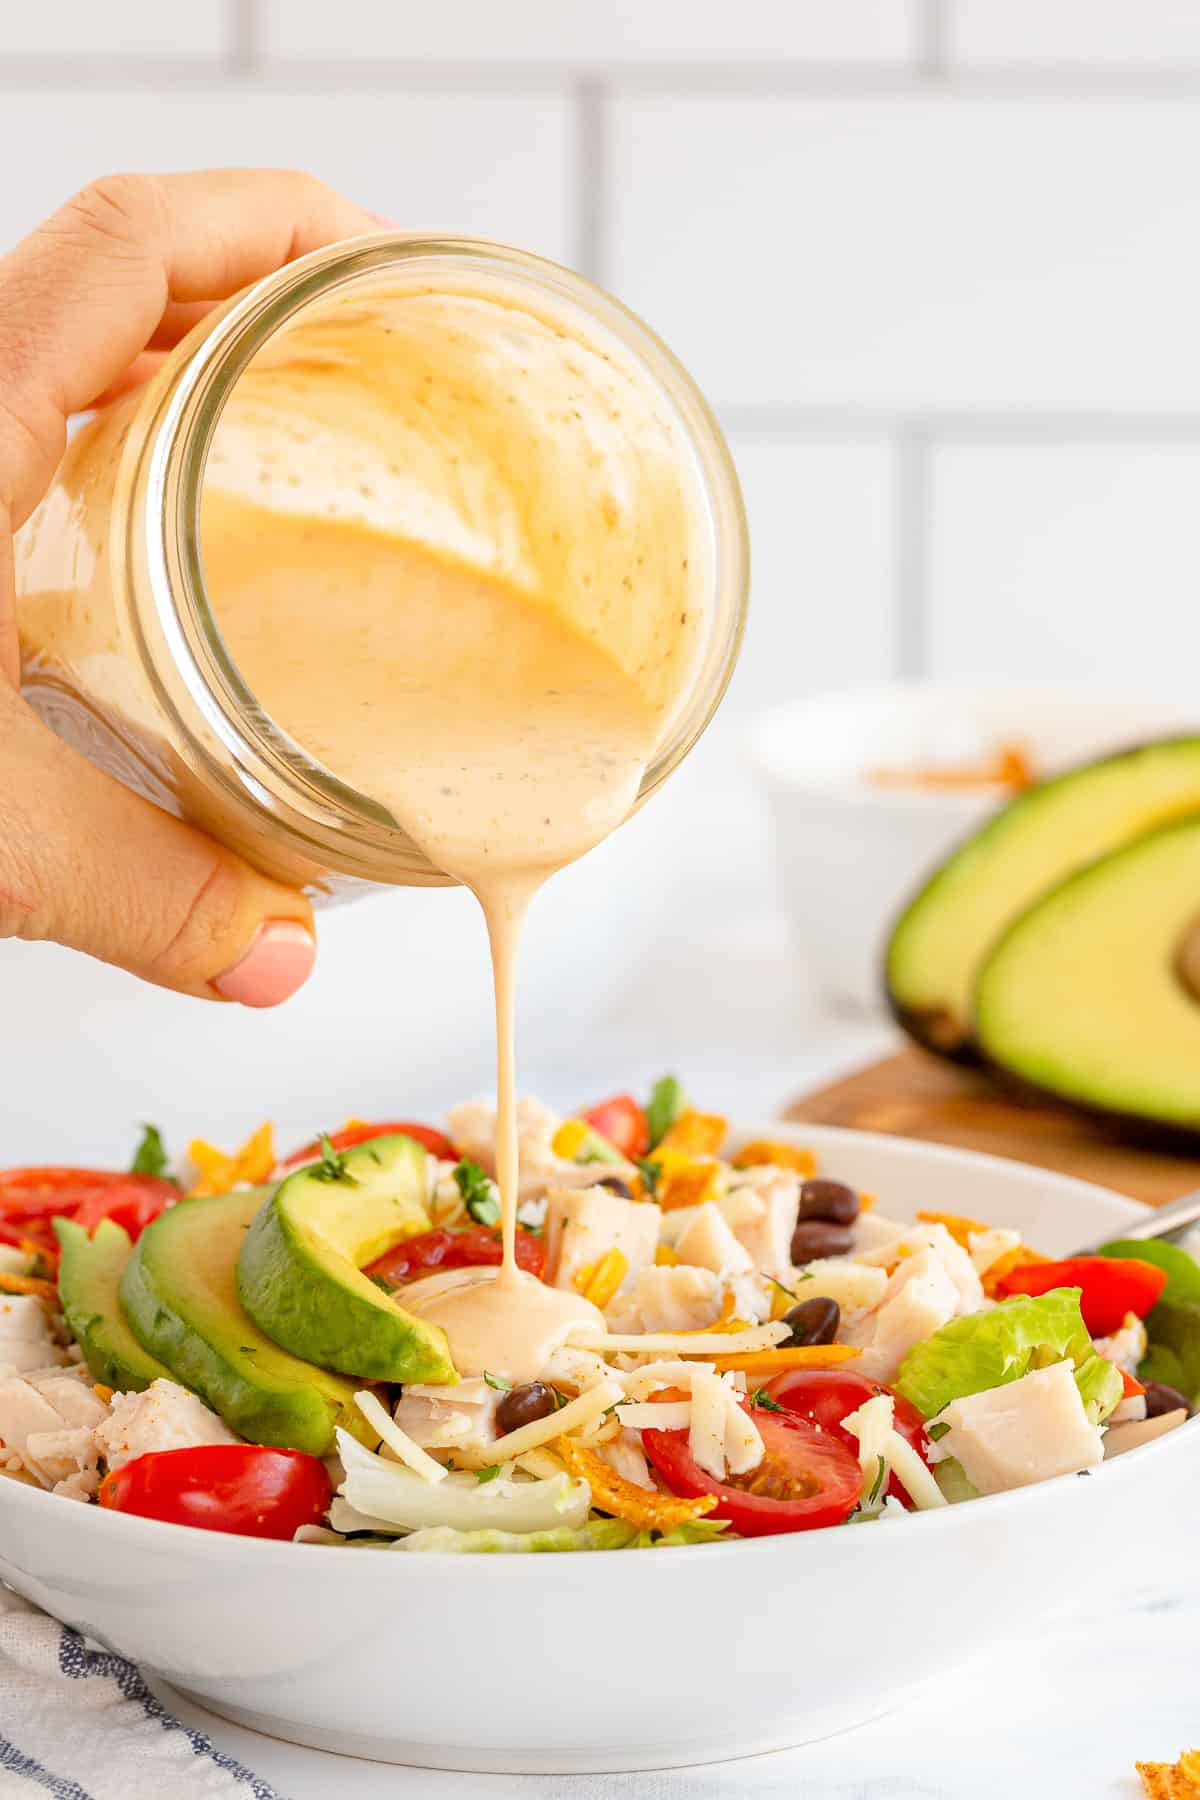 Southwest Caesar salad dressing is poured from a mason jar on to a salad.